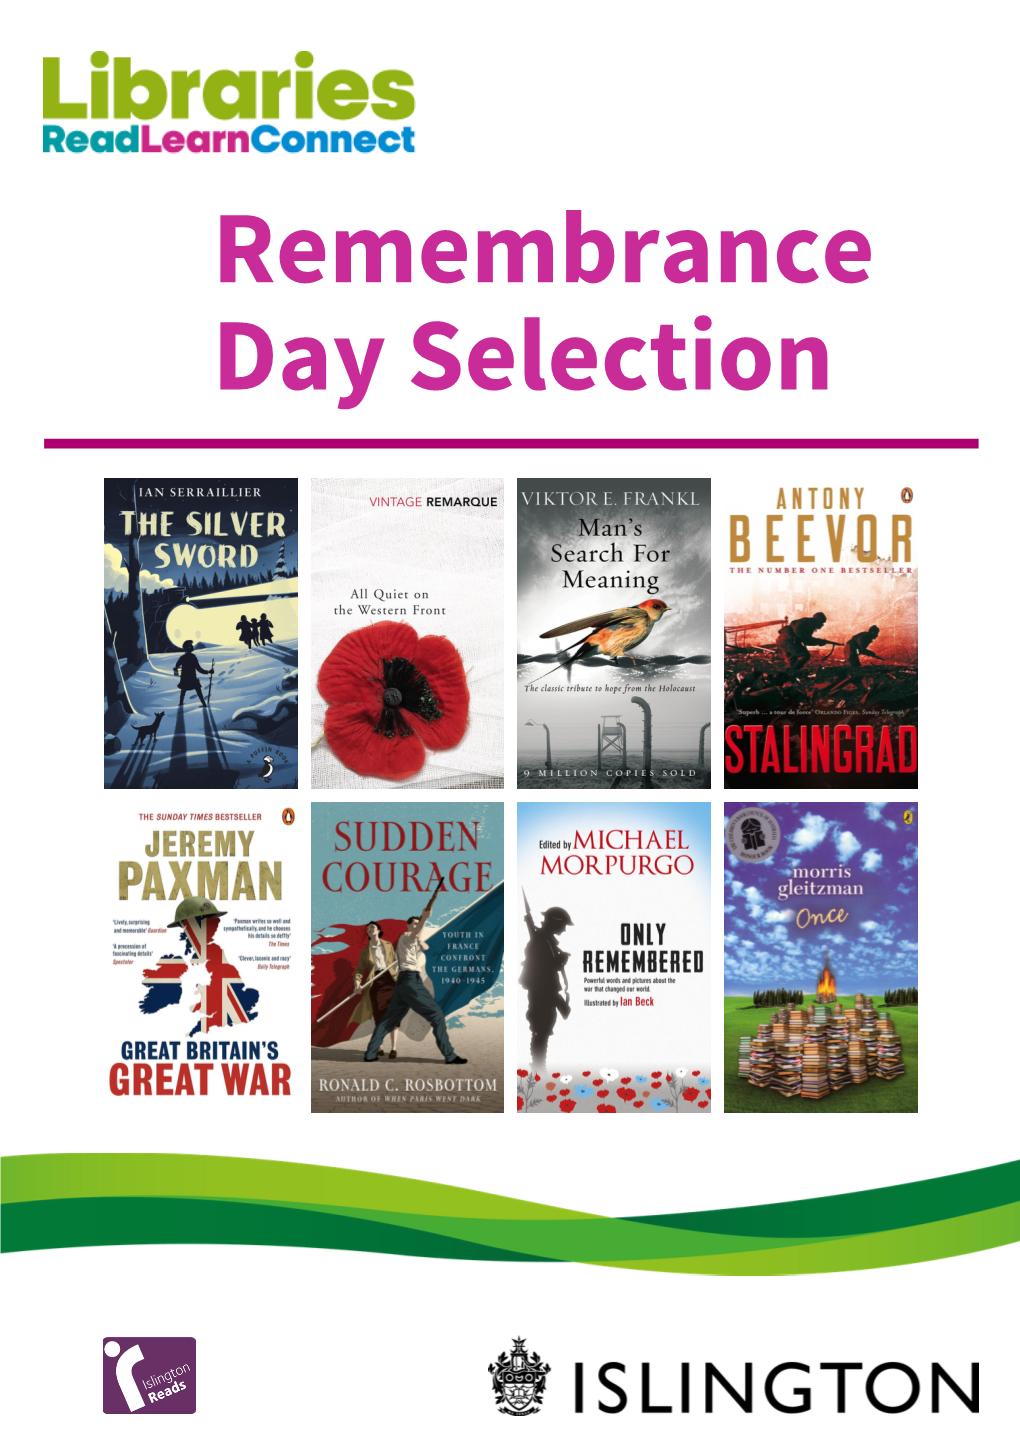 Remembrance Day Selection on the 11Th of November We Pay Tribute to the Men and Women Who Served to Defend Our Democratic Freedoms and Way of Life